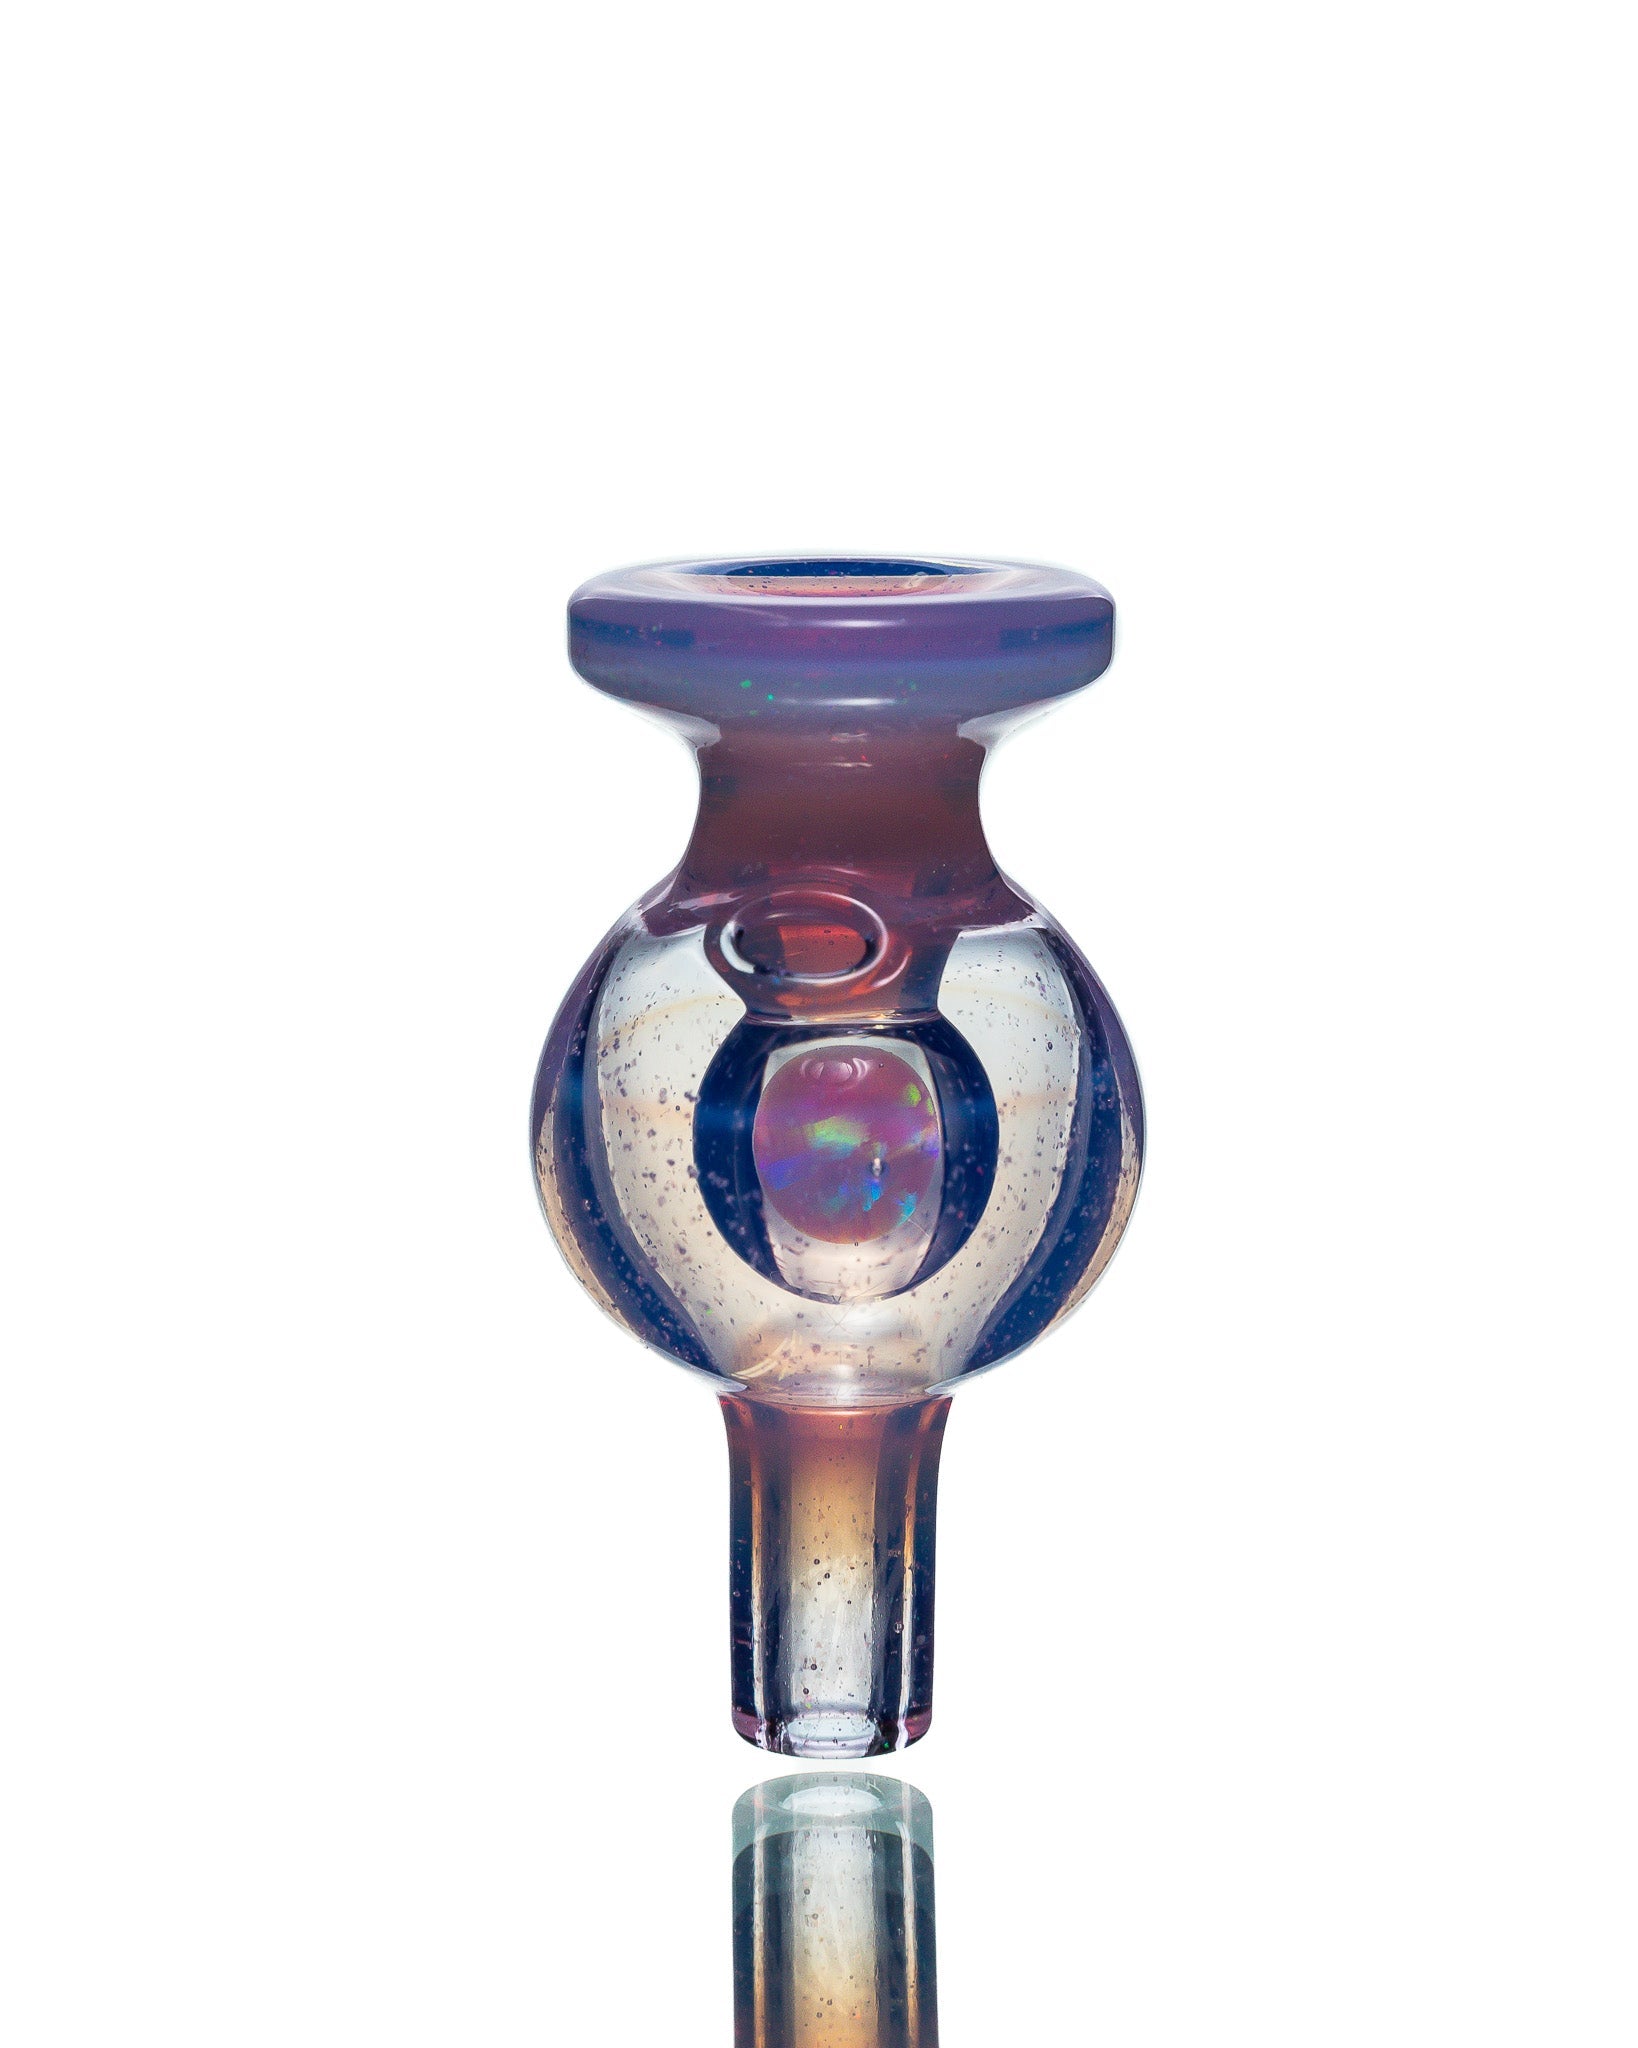 Soup Glass - "Frosty Pink" Crushed Opal Bubble Cap